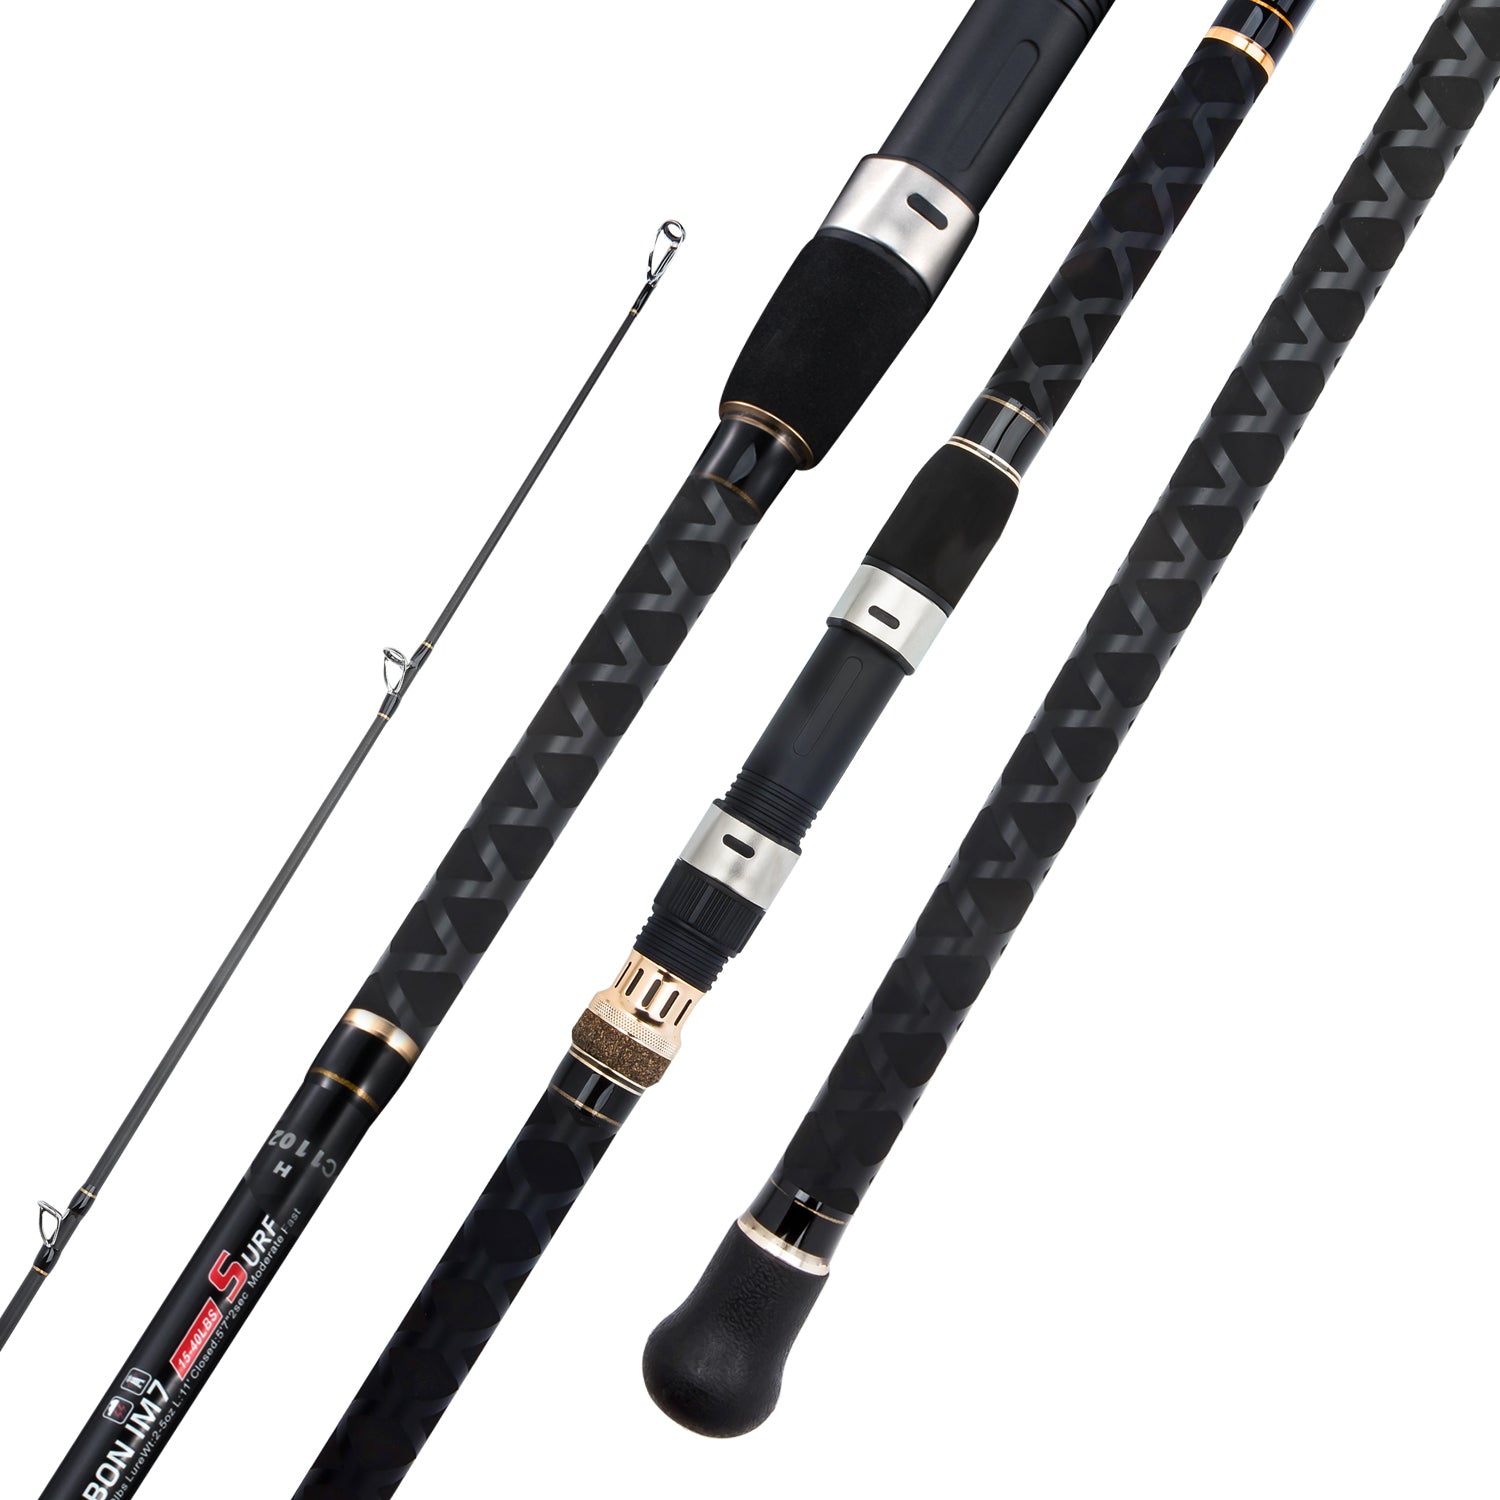 BERRYPRO Surf Spinning Fishing Rod Graphite Spinning Colombia